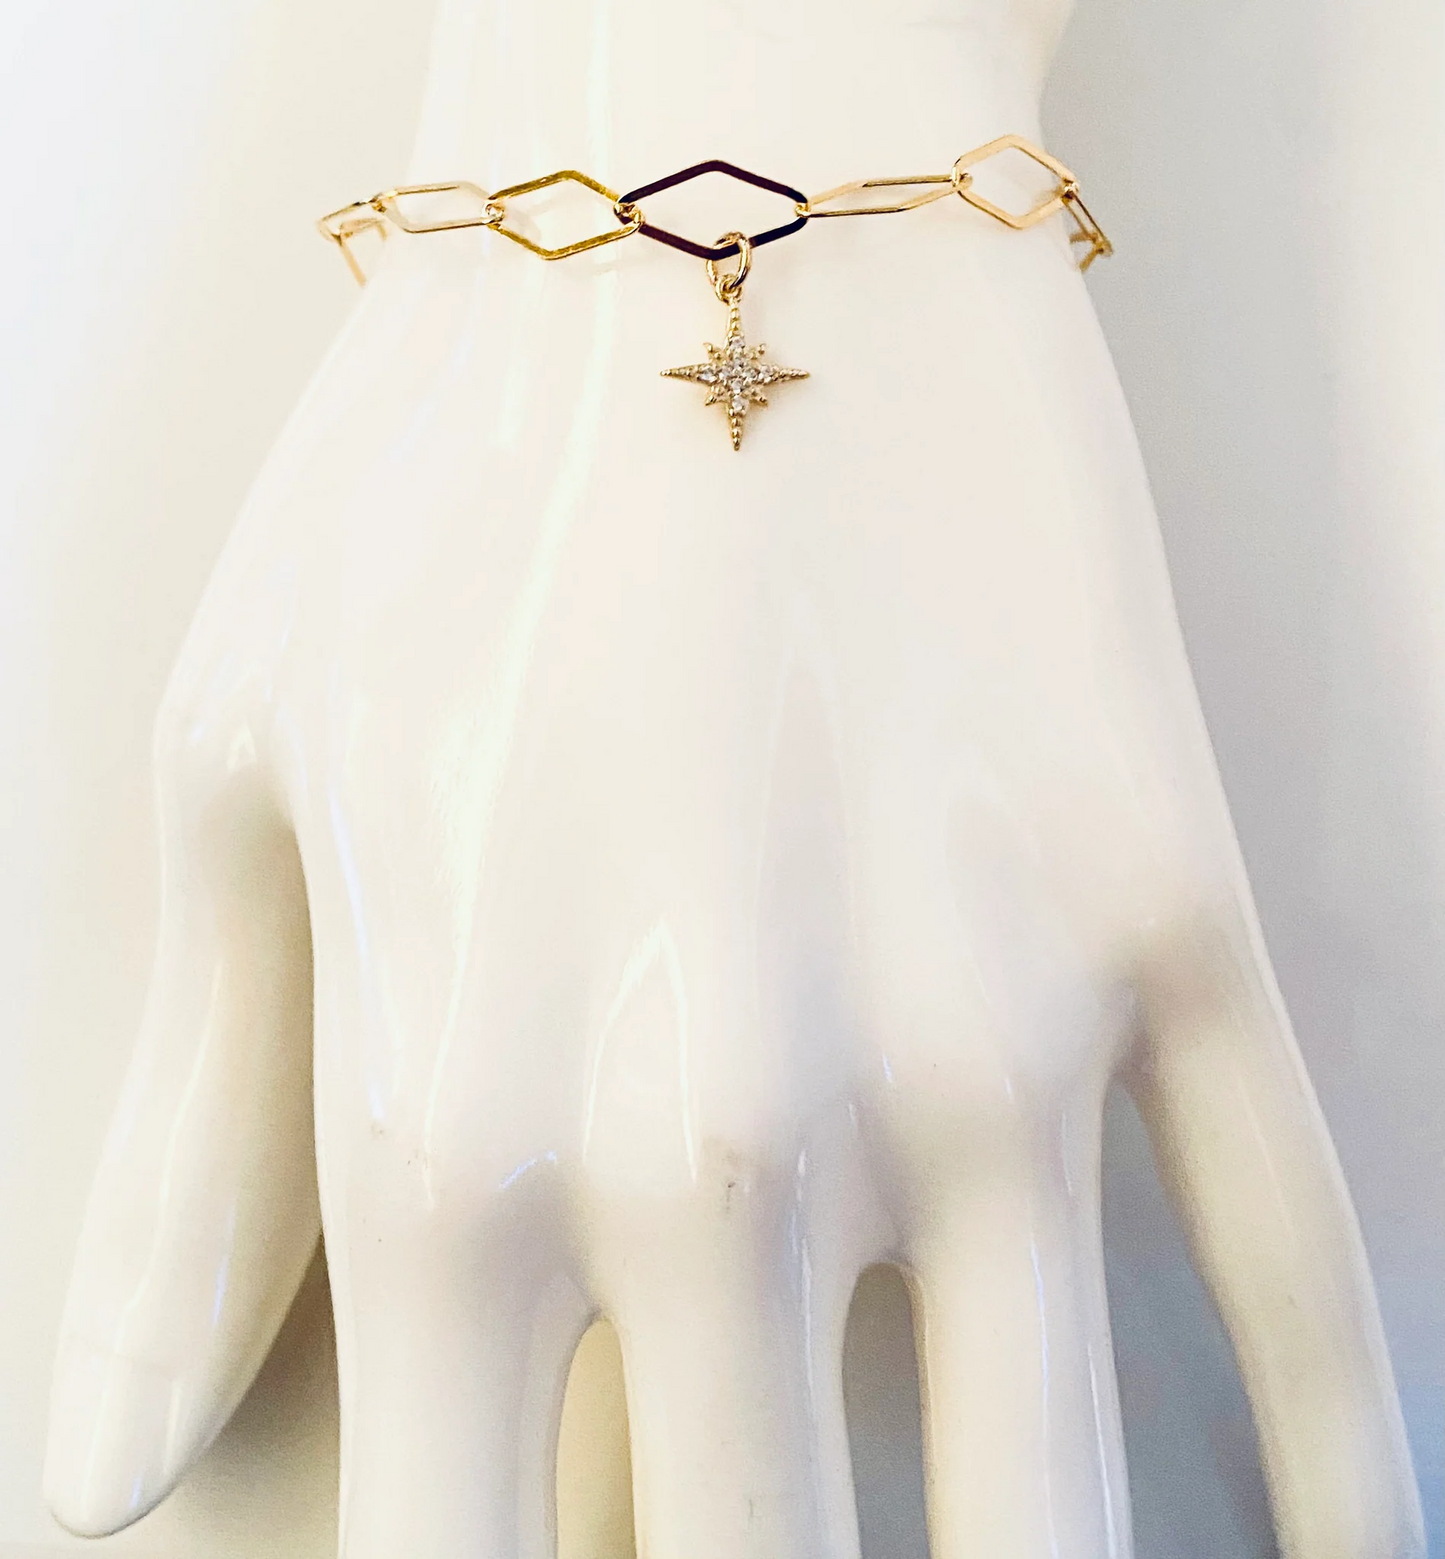 Load image into Gallery viewer, The Simple Diamond Star Charm Bracelet in Gold - SpiritedBoutiques Boho Hippie Boutique Style Bracelet, Modern Opus
